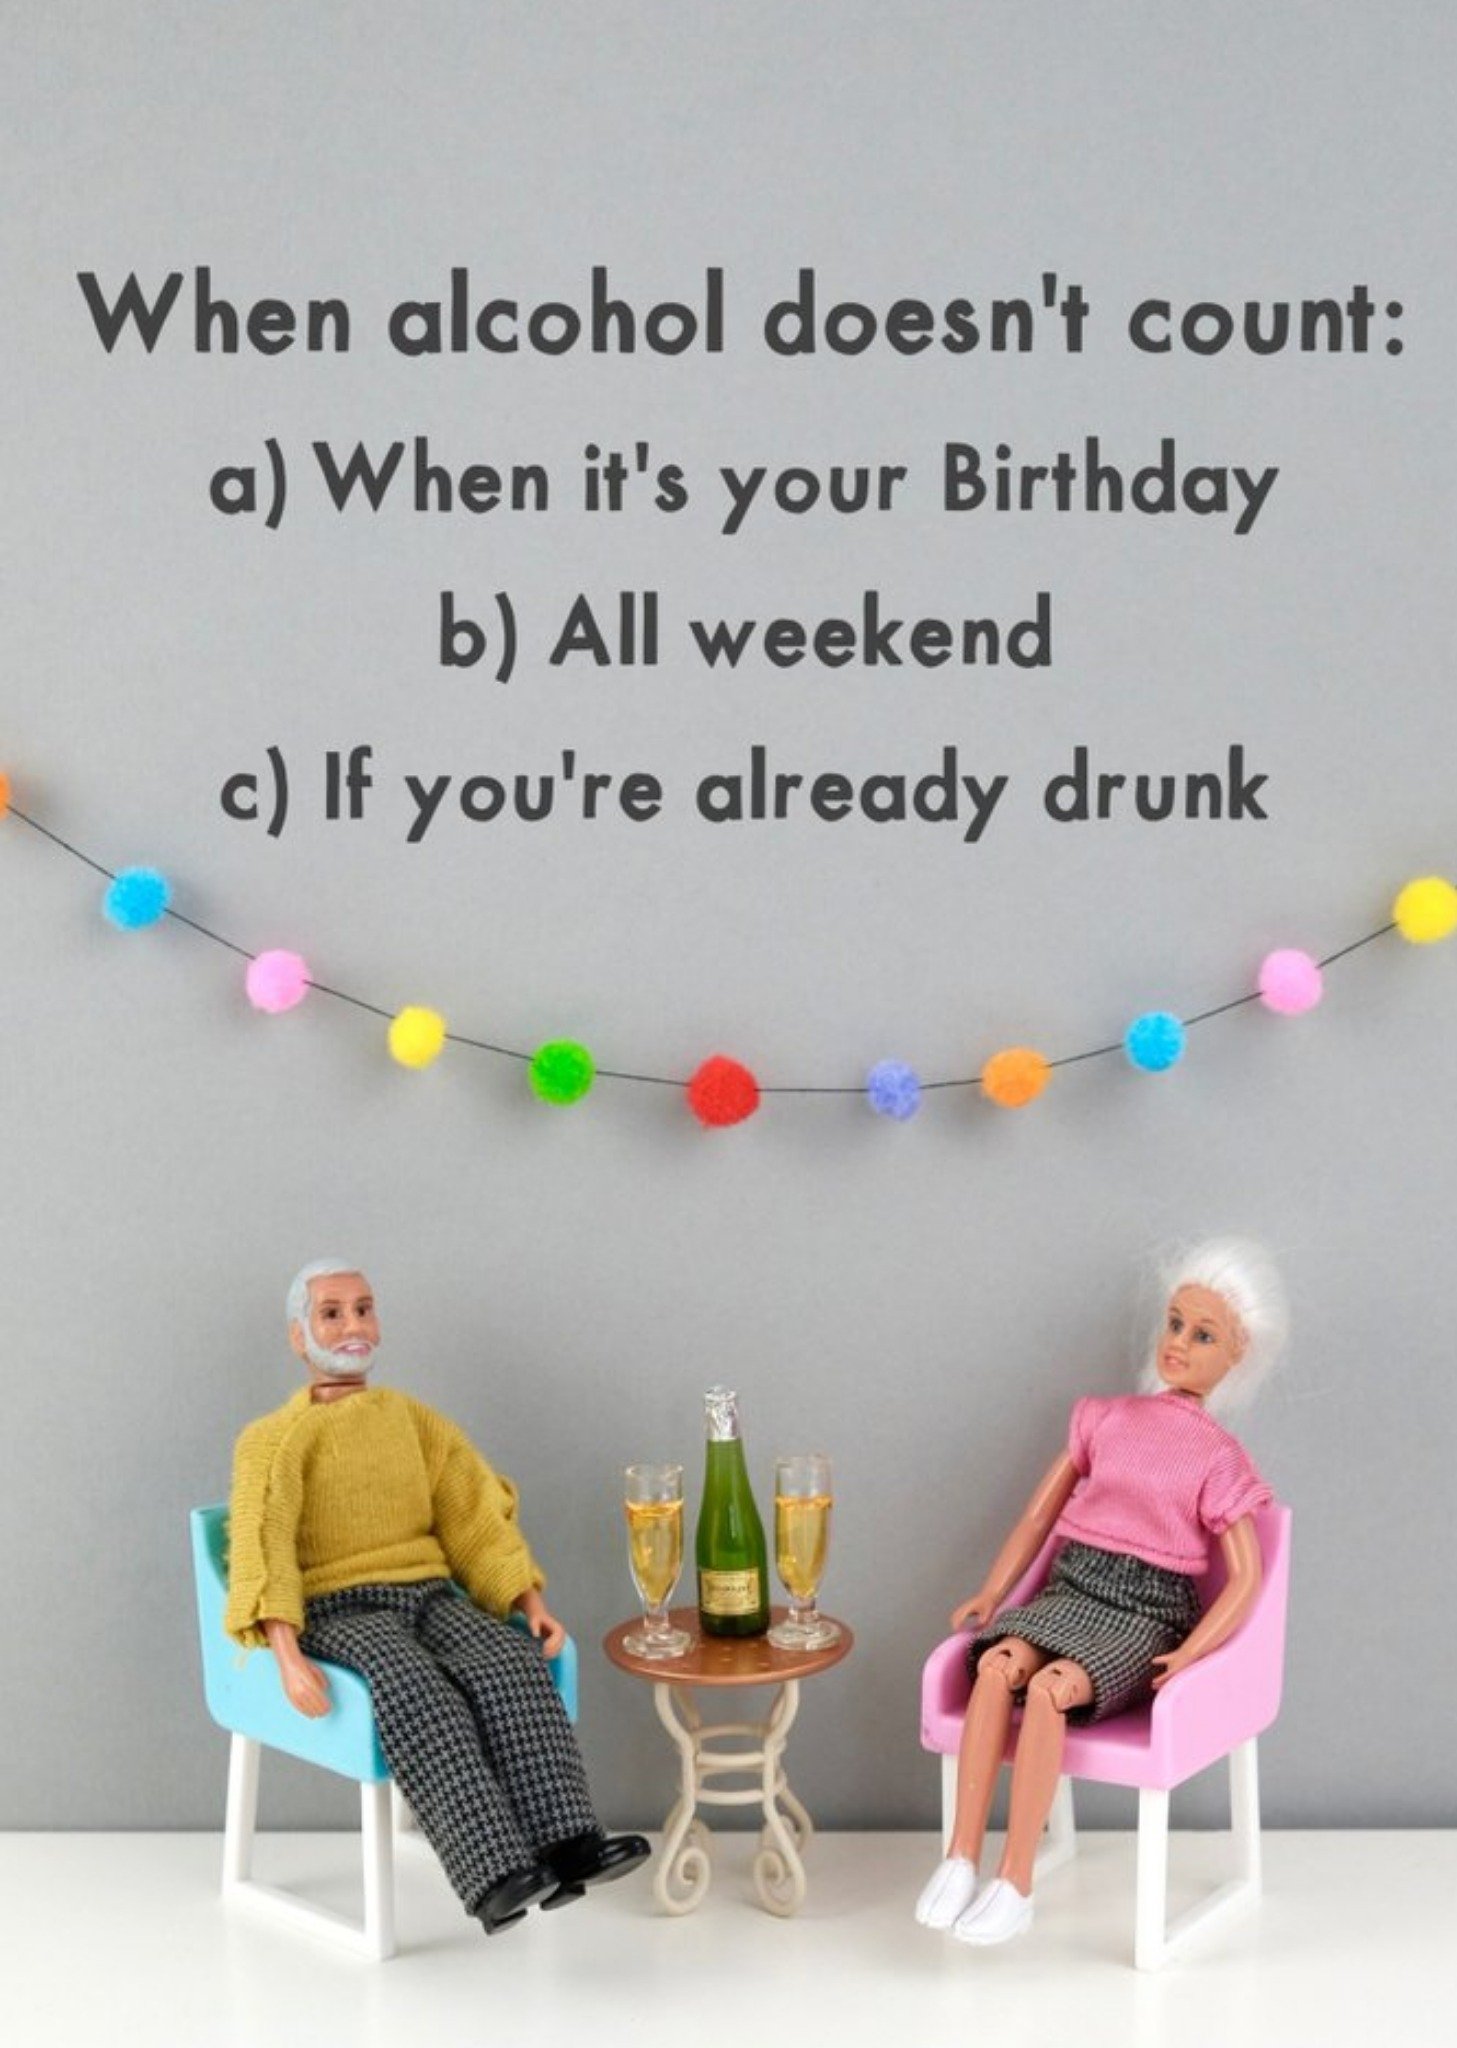 Bold And Bright Funny Dolls When Alcohol Doesn't Count Birthday Card, Large